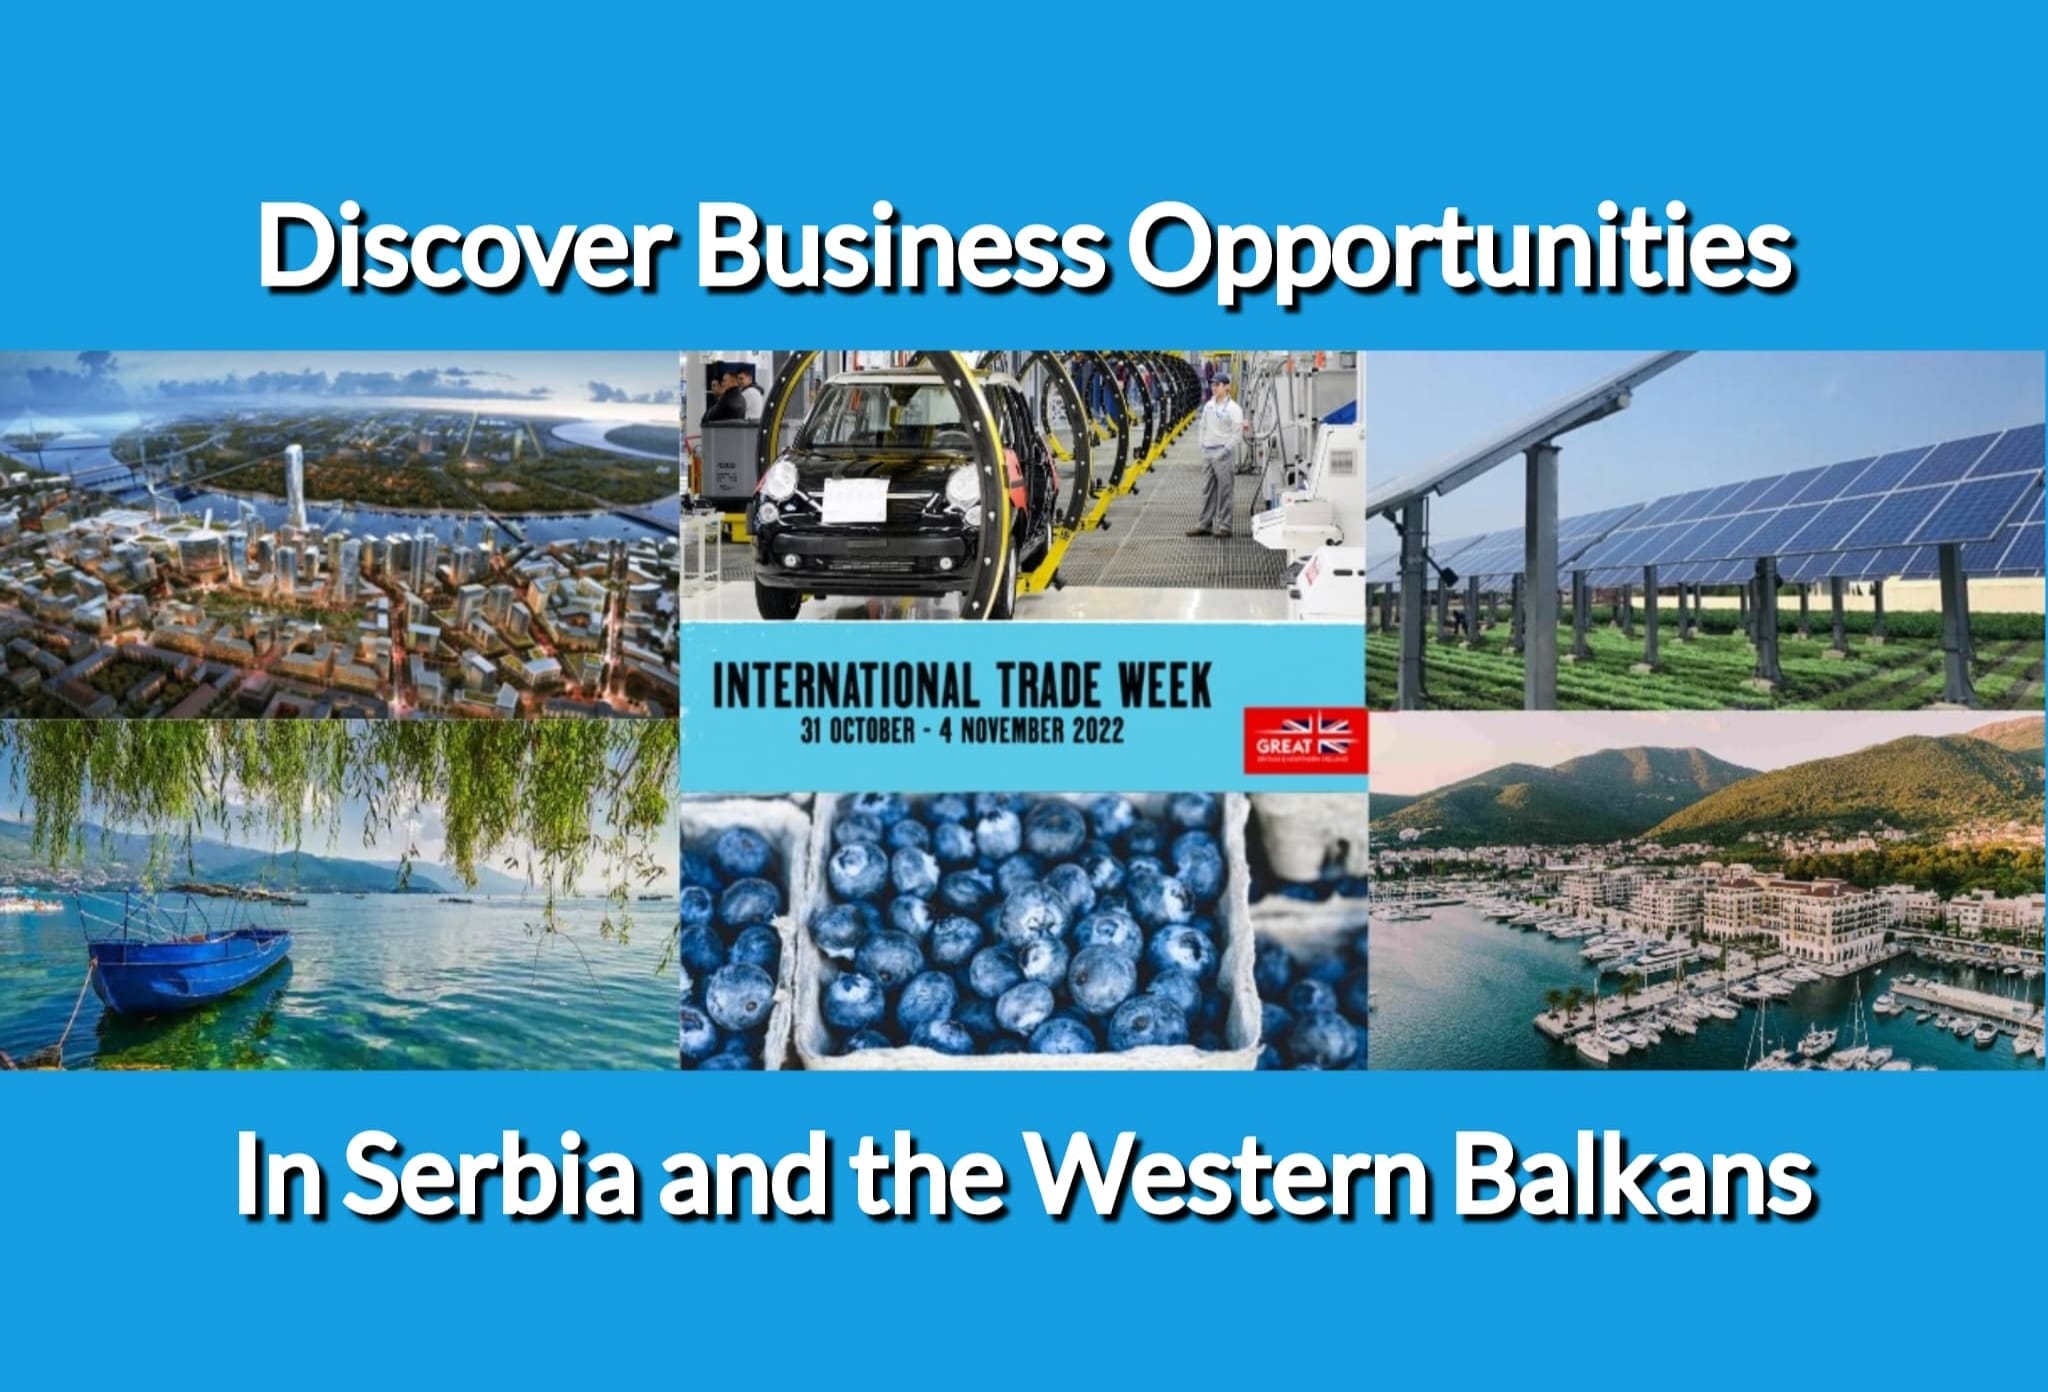 International Trade Week Webinar: Discover Business Opportunities in Serbia and the Western Balkans